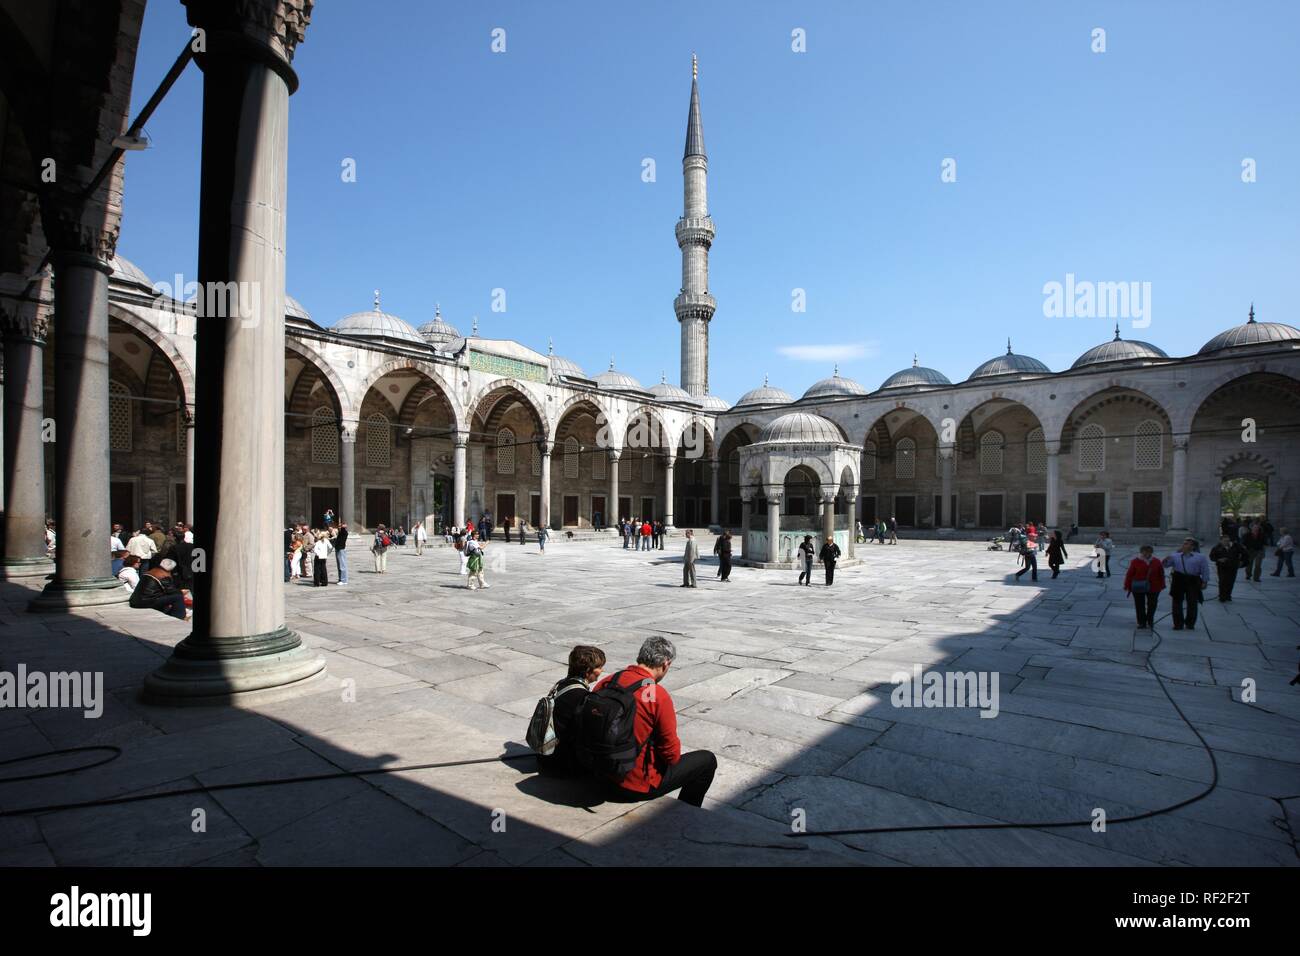 Courtyard, Blue Mosque, Sultan Ahmet Mosque, Istanbul, Turkey Stock Photo